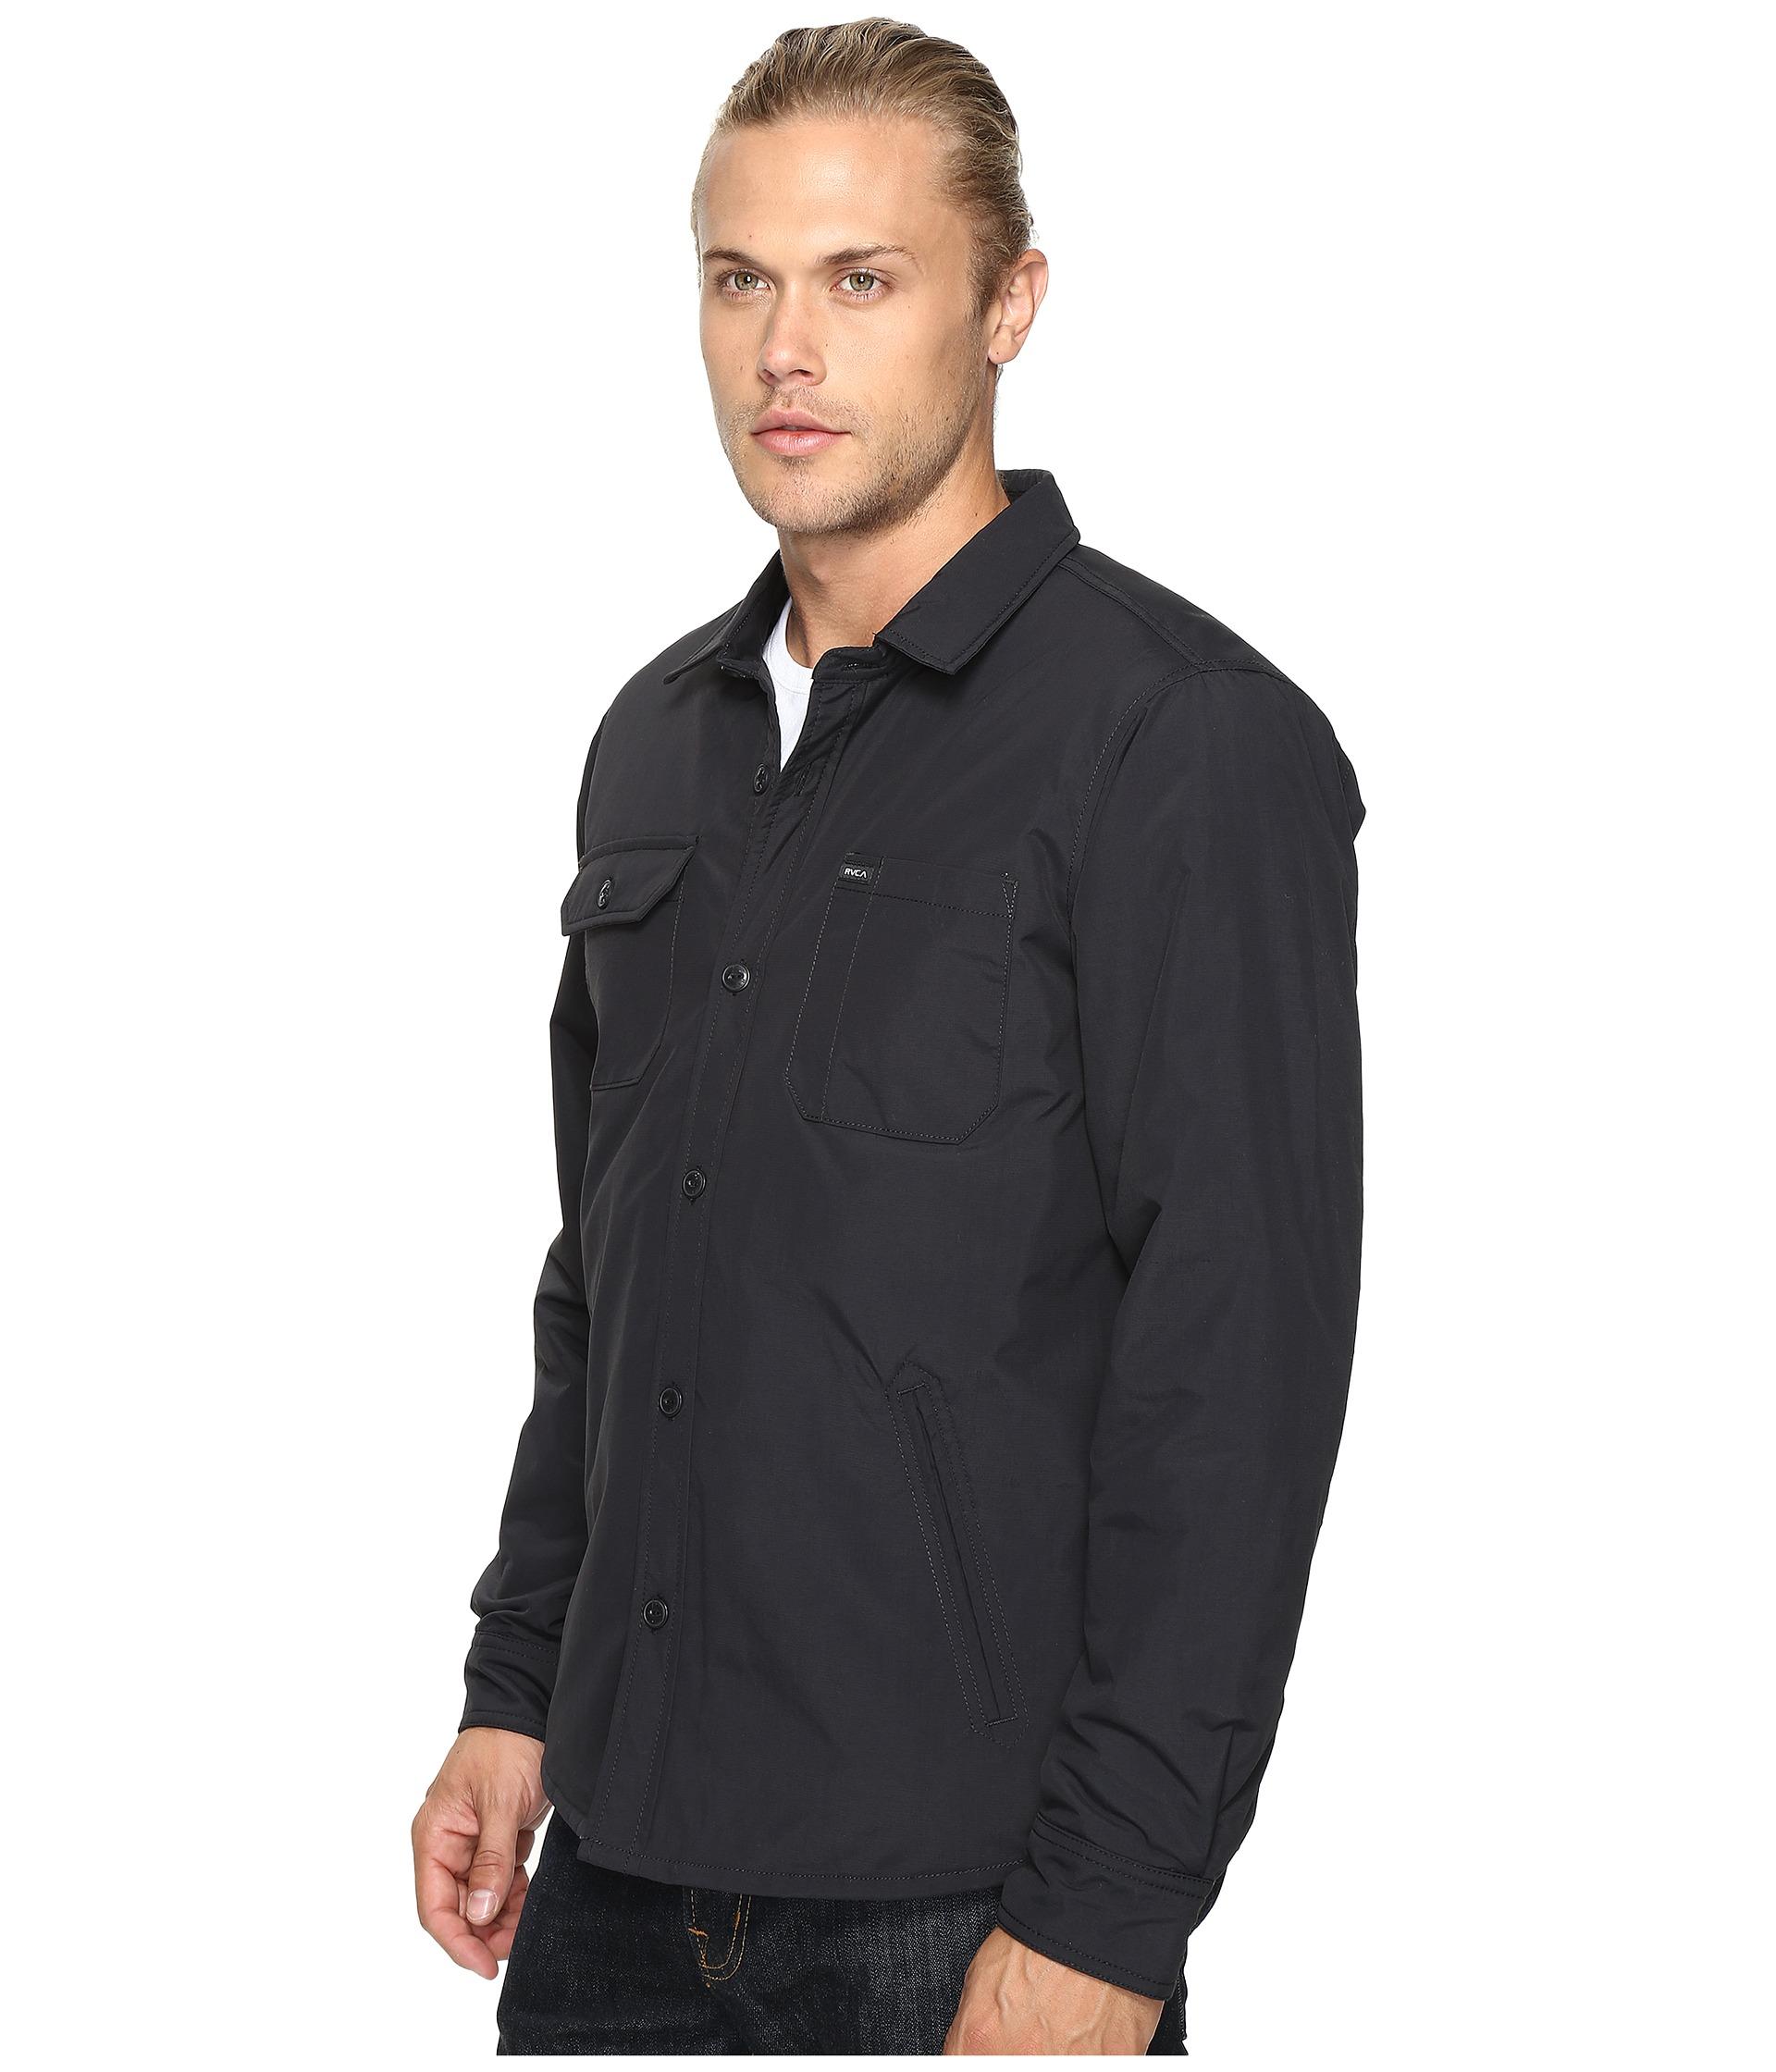 Lyst - Rvca Cpo Shirt Jacket in Black for Men